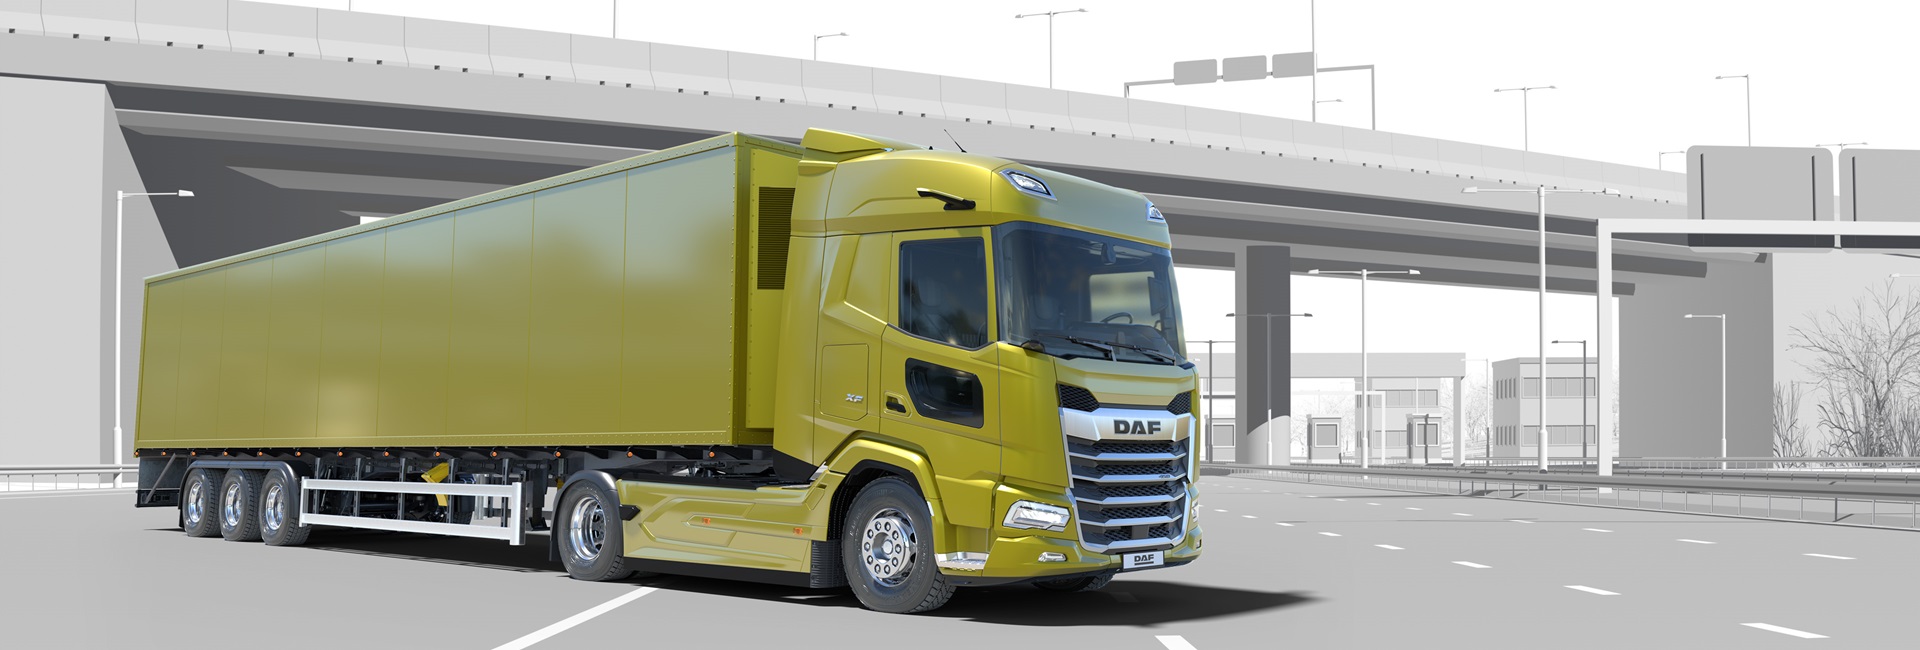 DAF-XF-450-FT380-LHD-LongDistance-TemperatureControlled